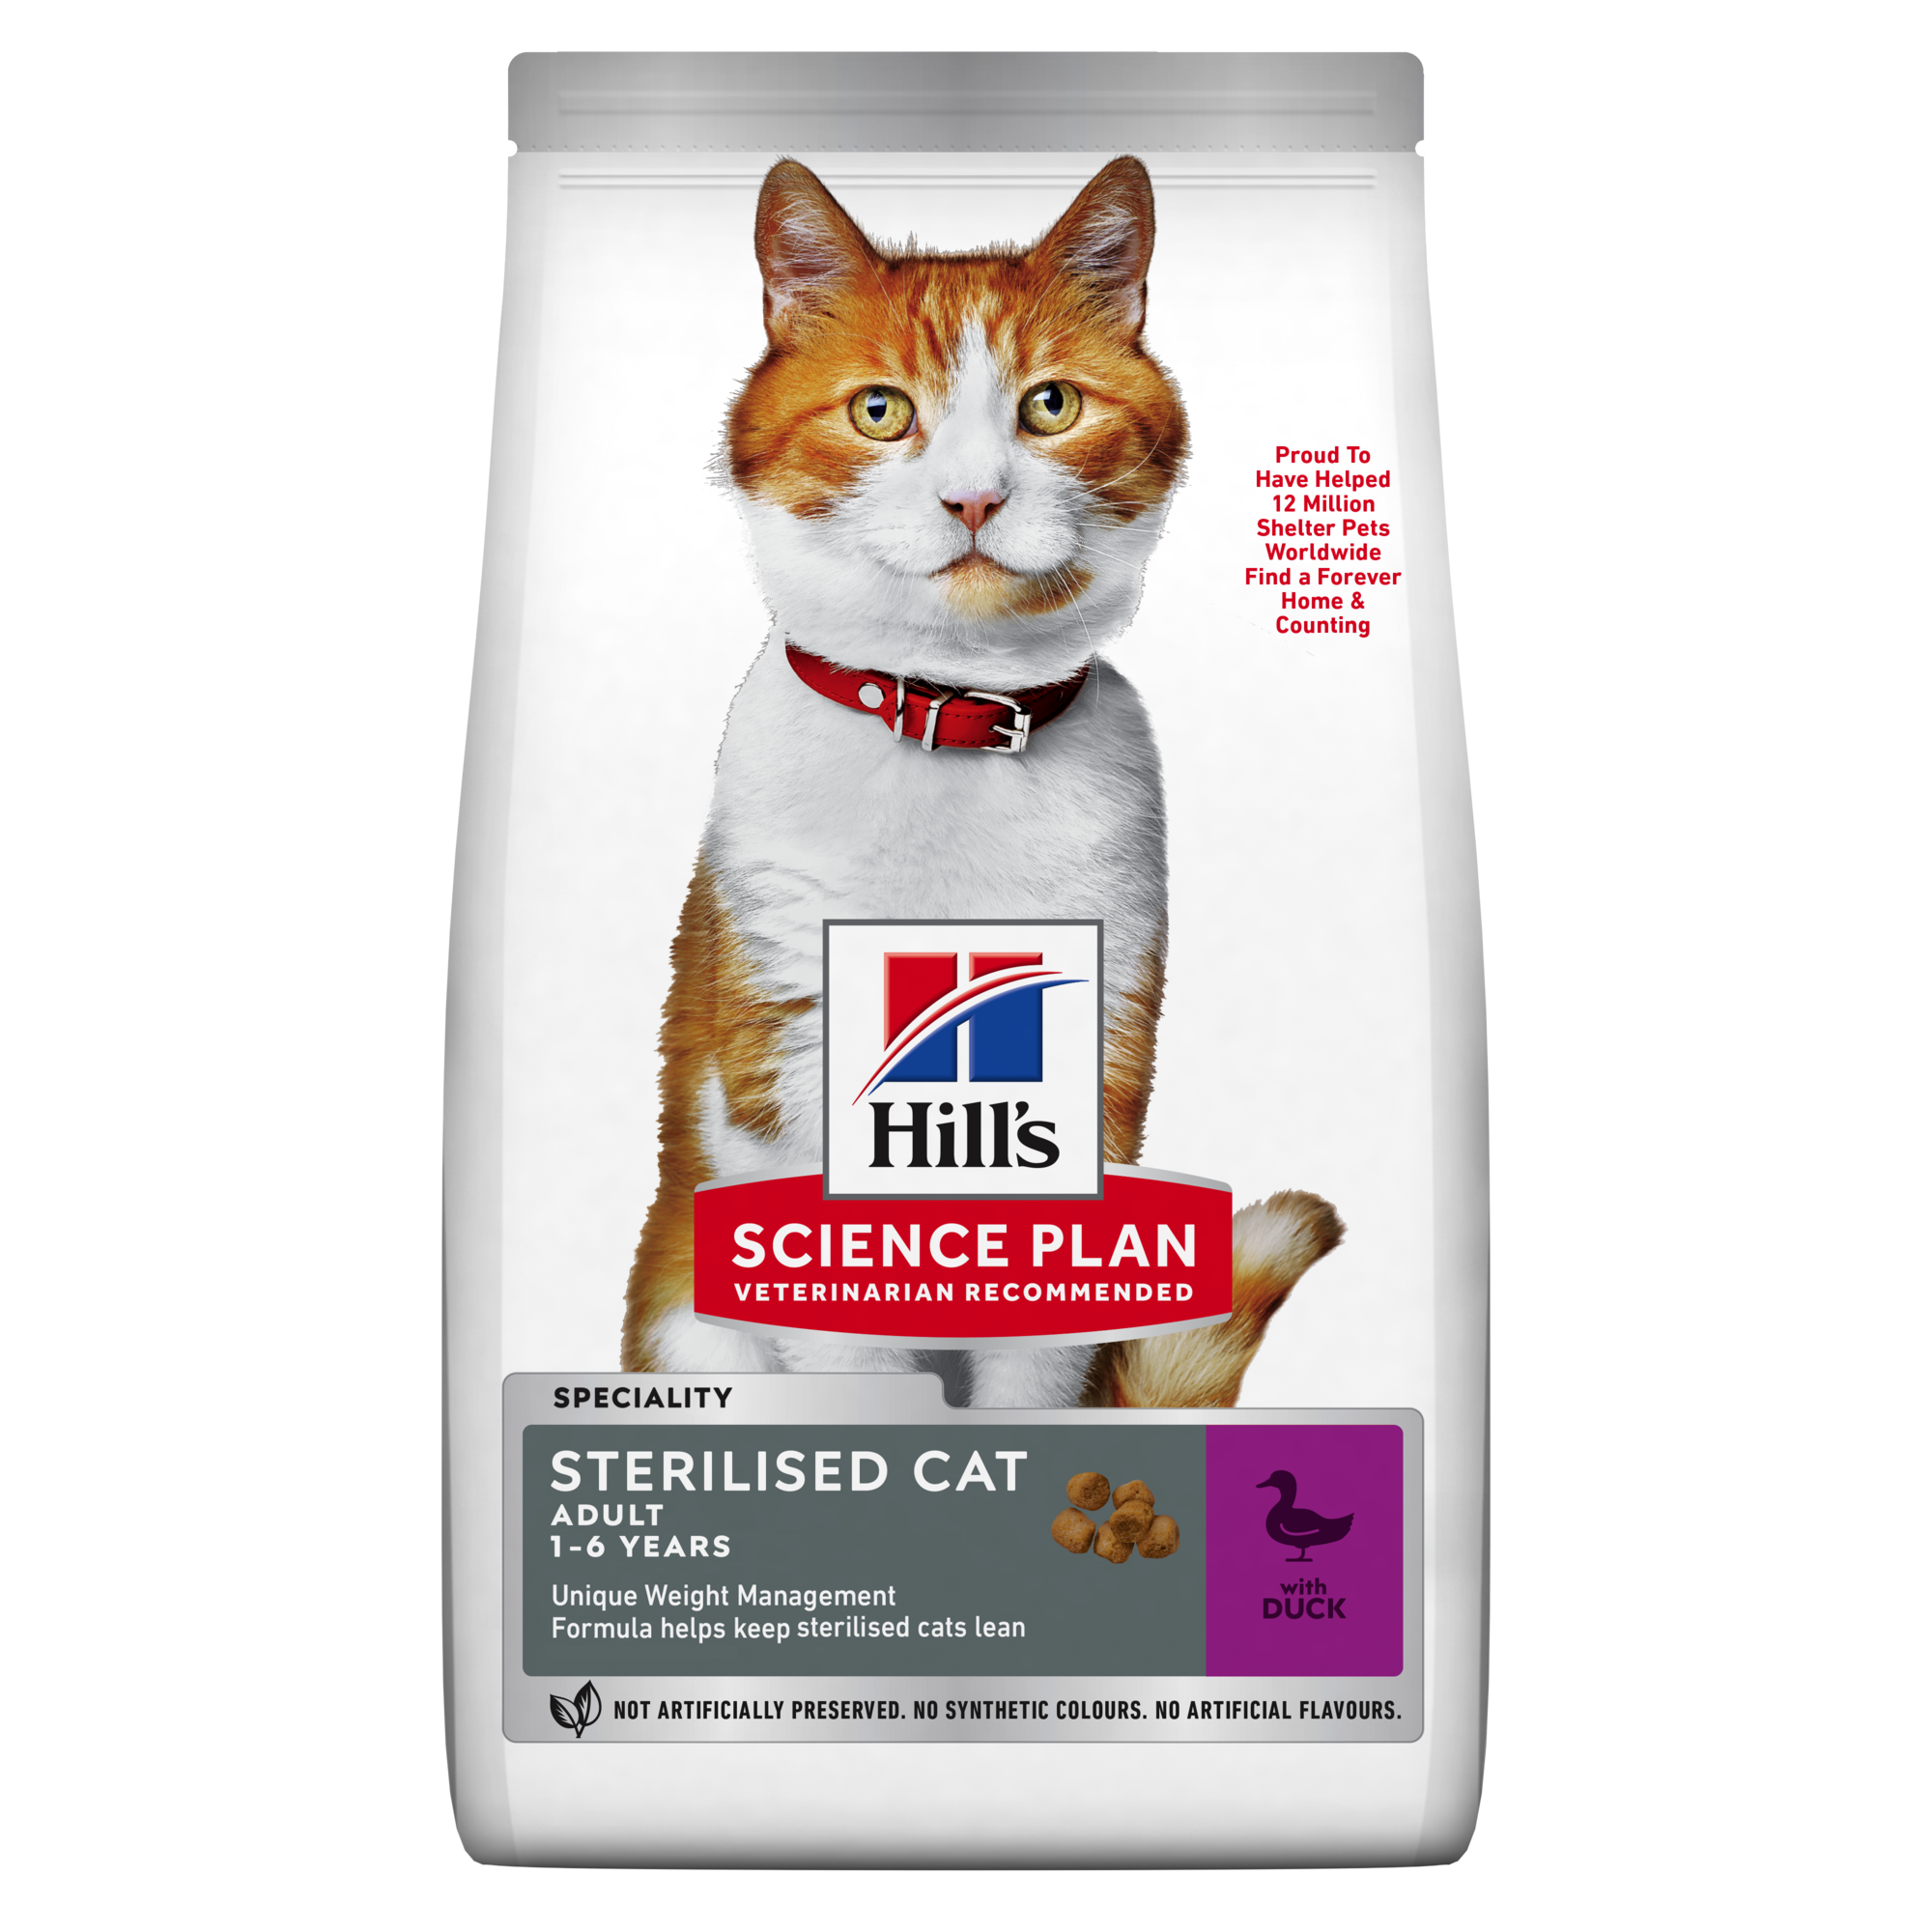 Hill's Science Plan STERILISED CAT YOUNG ADULT au CANARD Cat Food 1.5 kg